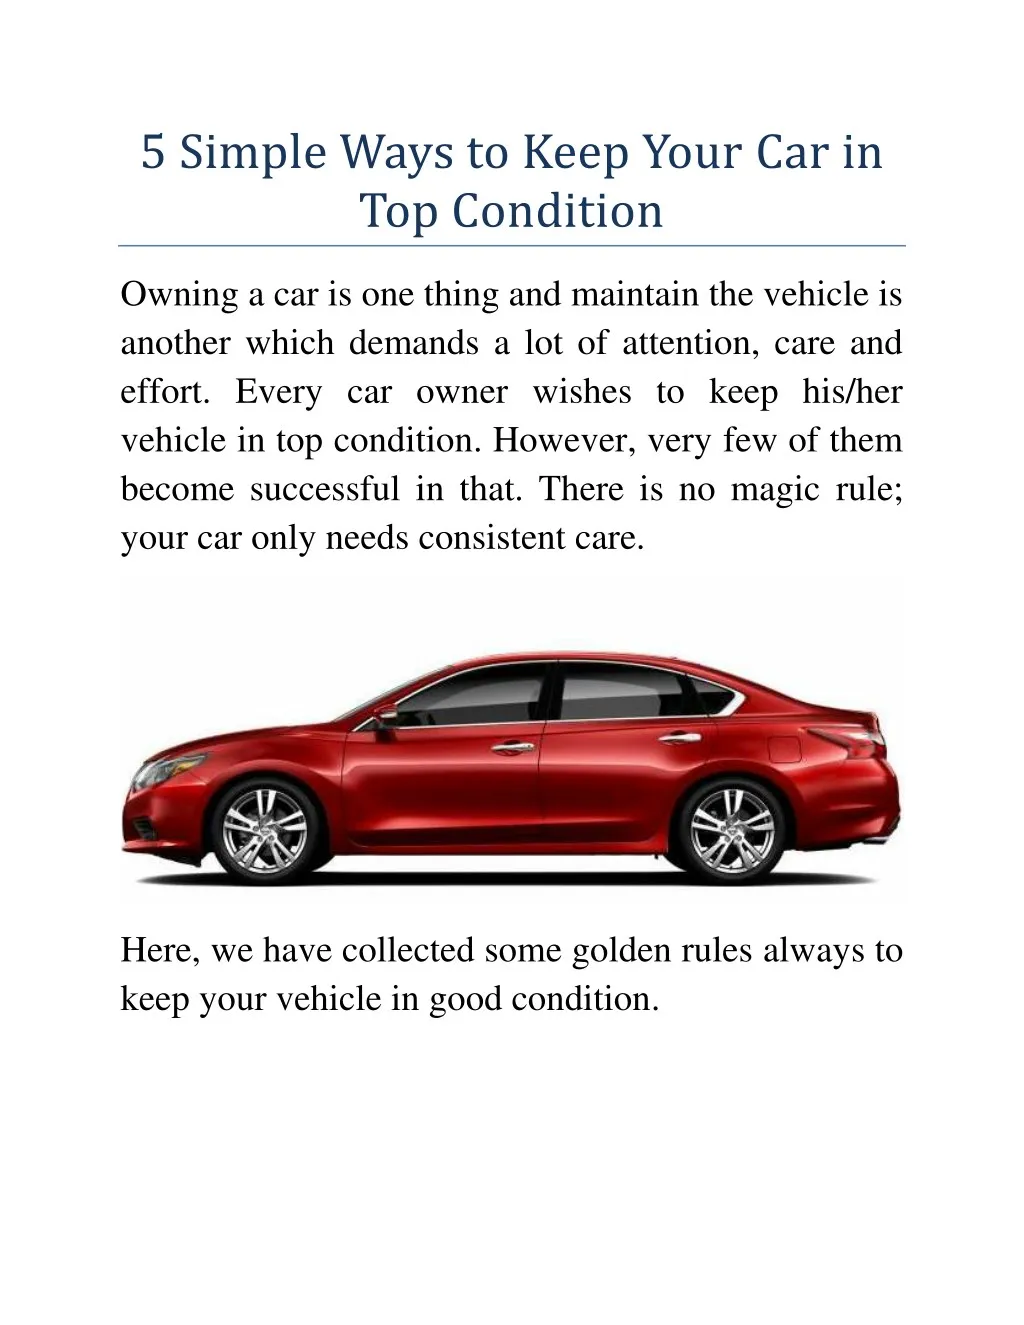 5 simple ways to keep your car in top condition